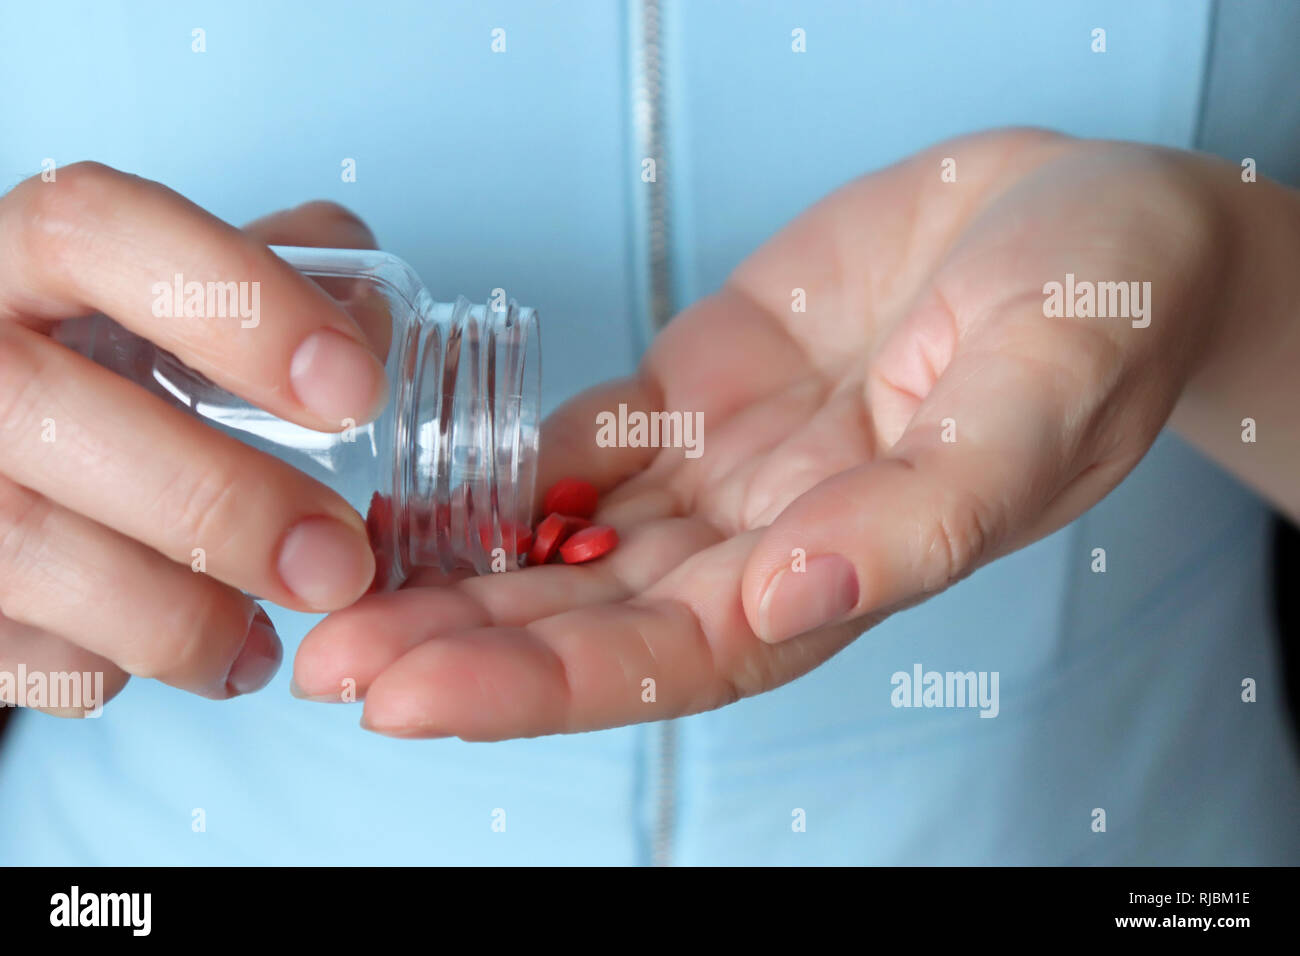 Woman taking pills, red tabs in female hands close-up. Concept of illness, vitamins, doctor with medication, contraceptive or diet Stock Photo